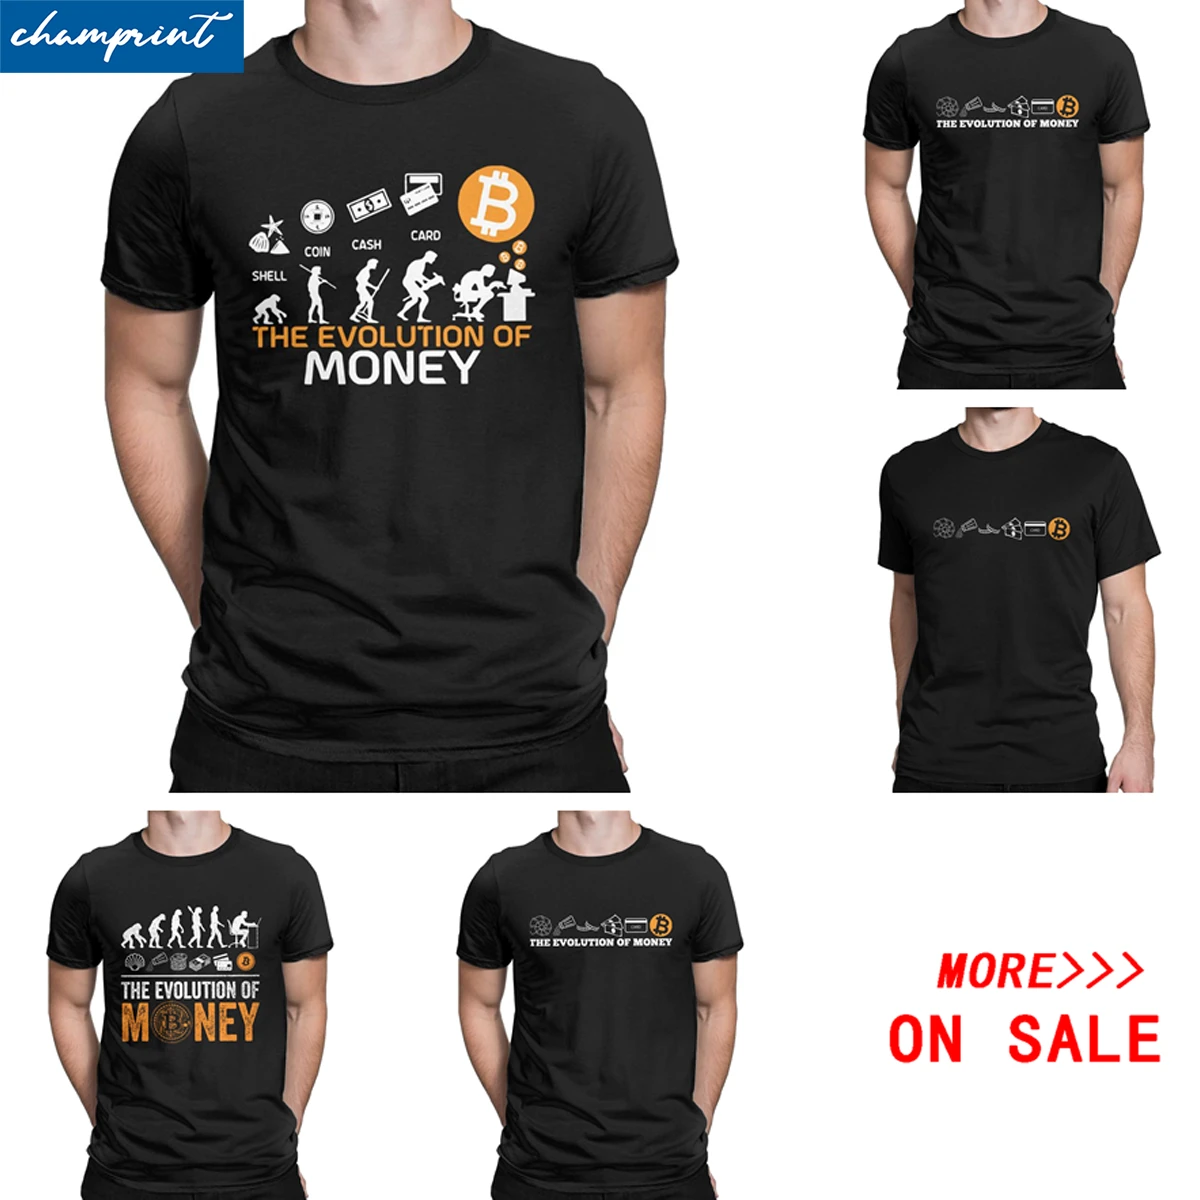 Men Women's T-Shirt The Evolution Of Money Funny Bitcoin Tees Crypto Coin Cryptocurrency T Shirts Plus Size Clothing